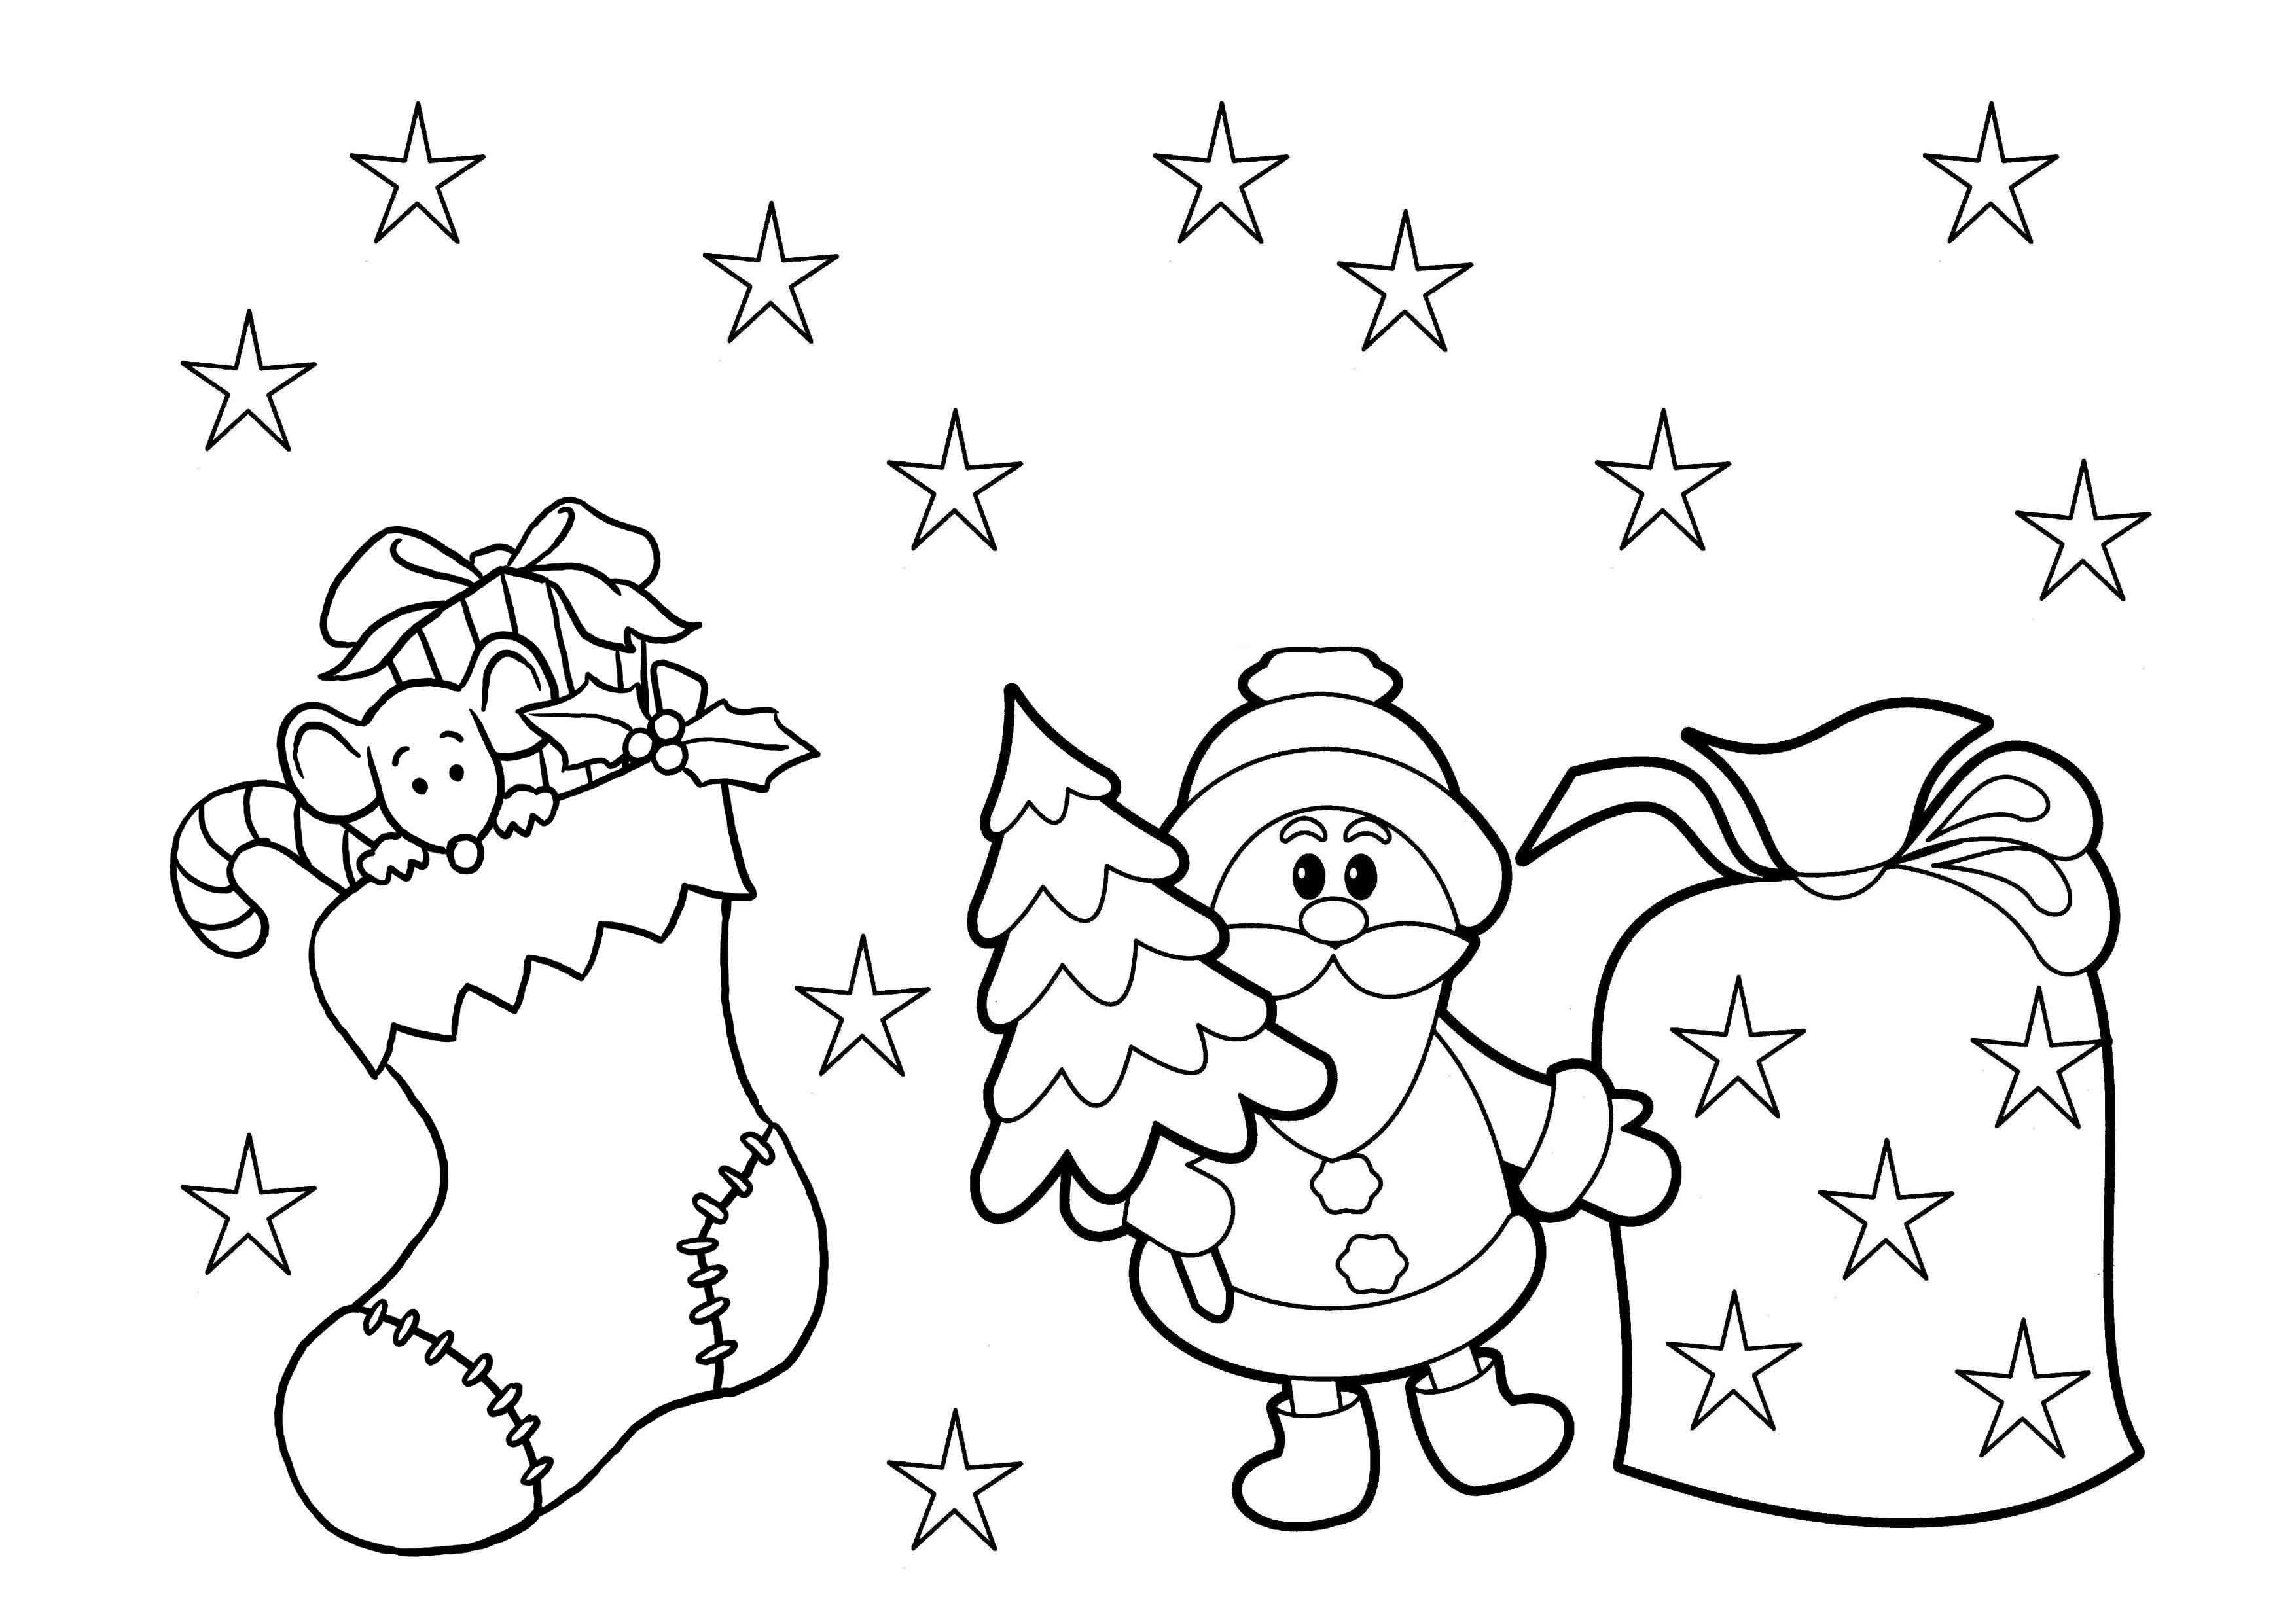 Pre K Coloring Pages at GetColorings.com  Free printable colorings